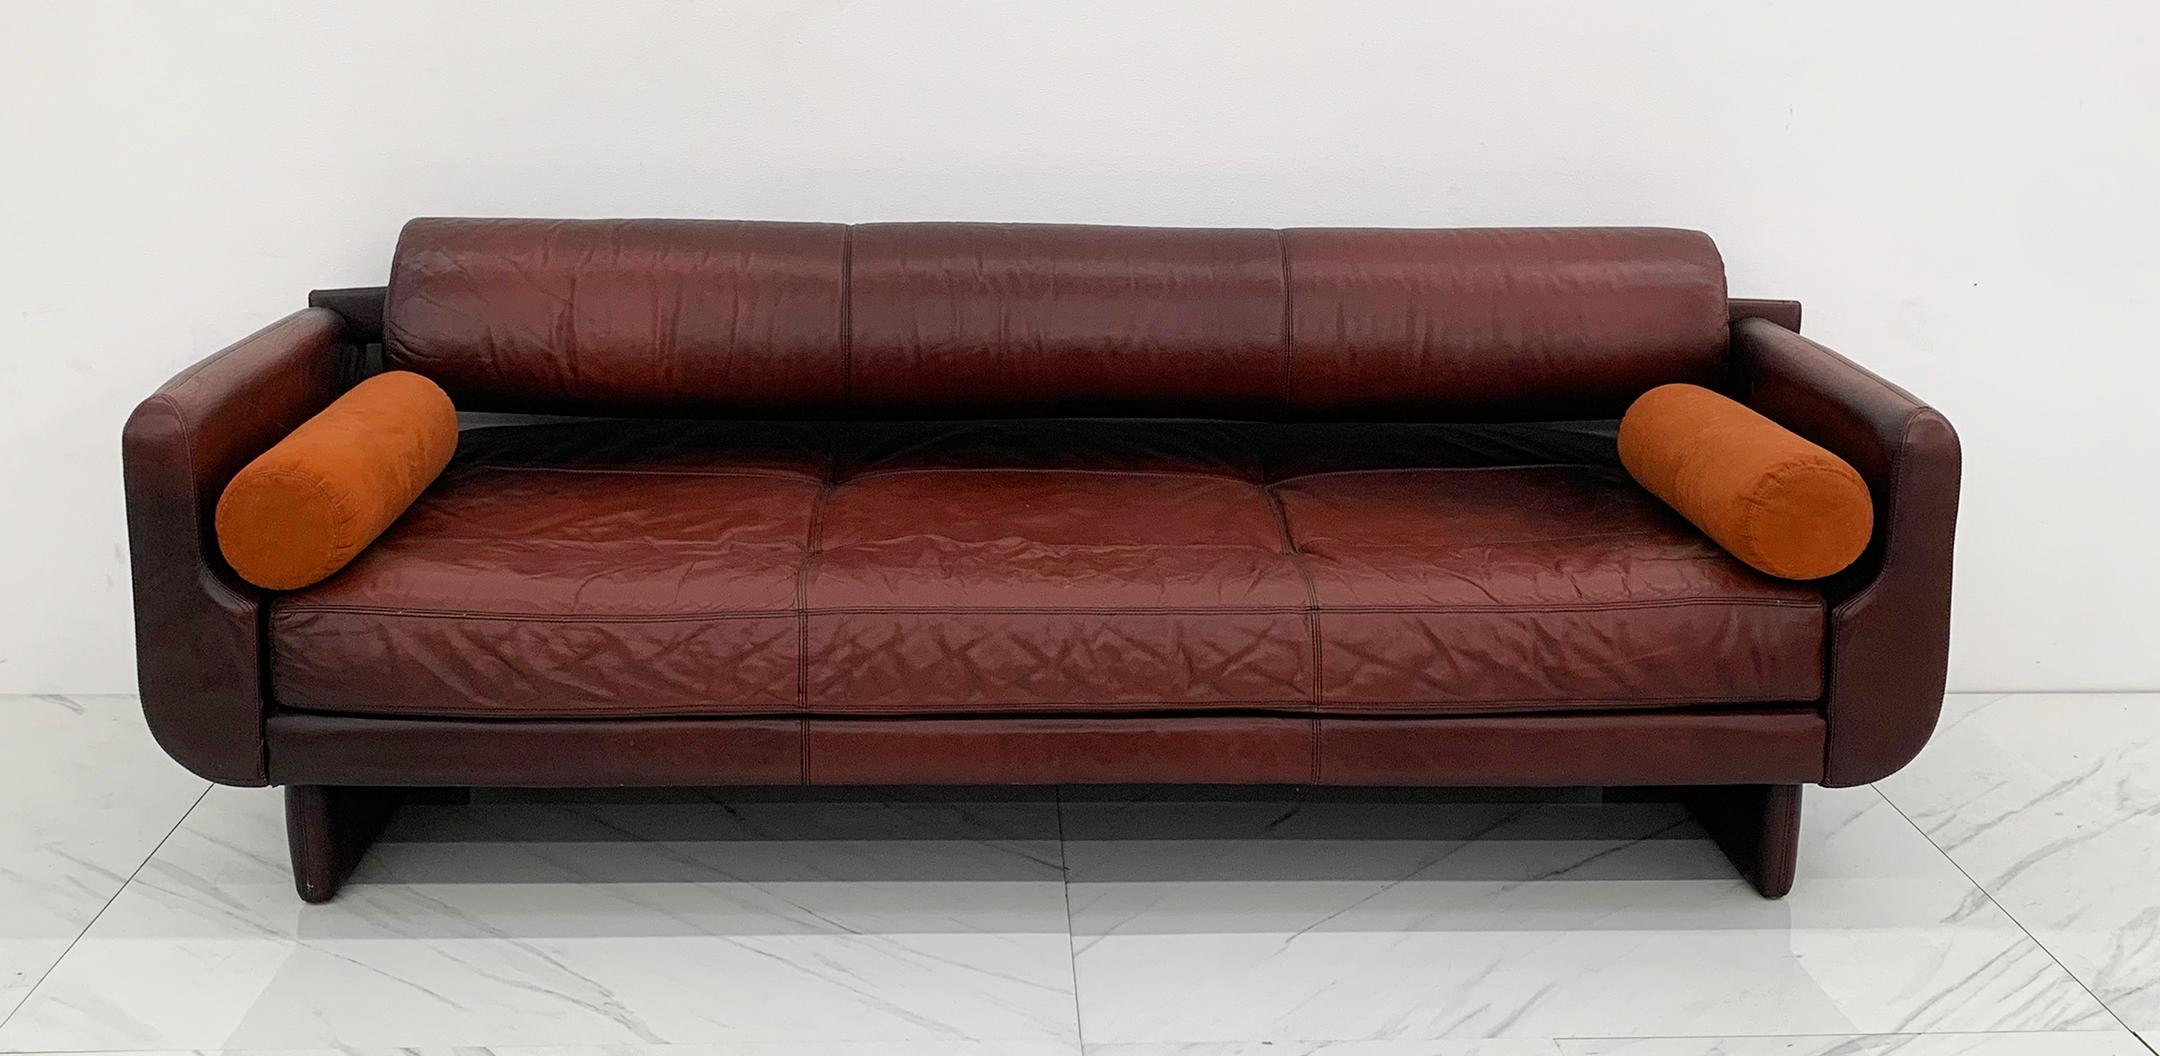 Contemporary Vladimir Kagan for American Leather Matinee Sofa / Daybed